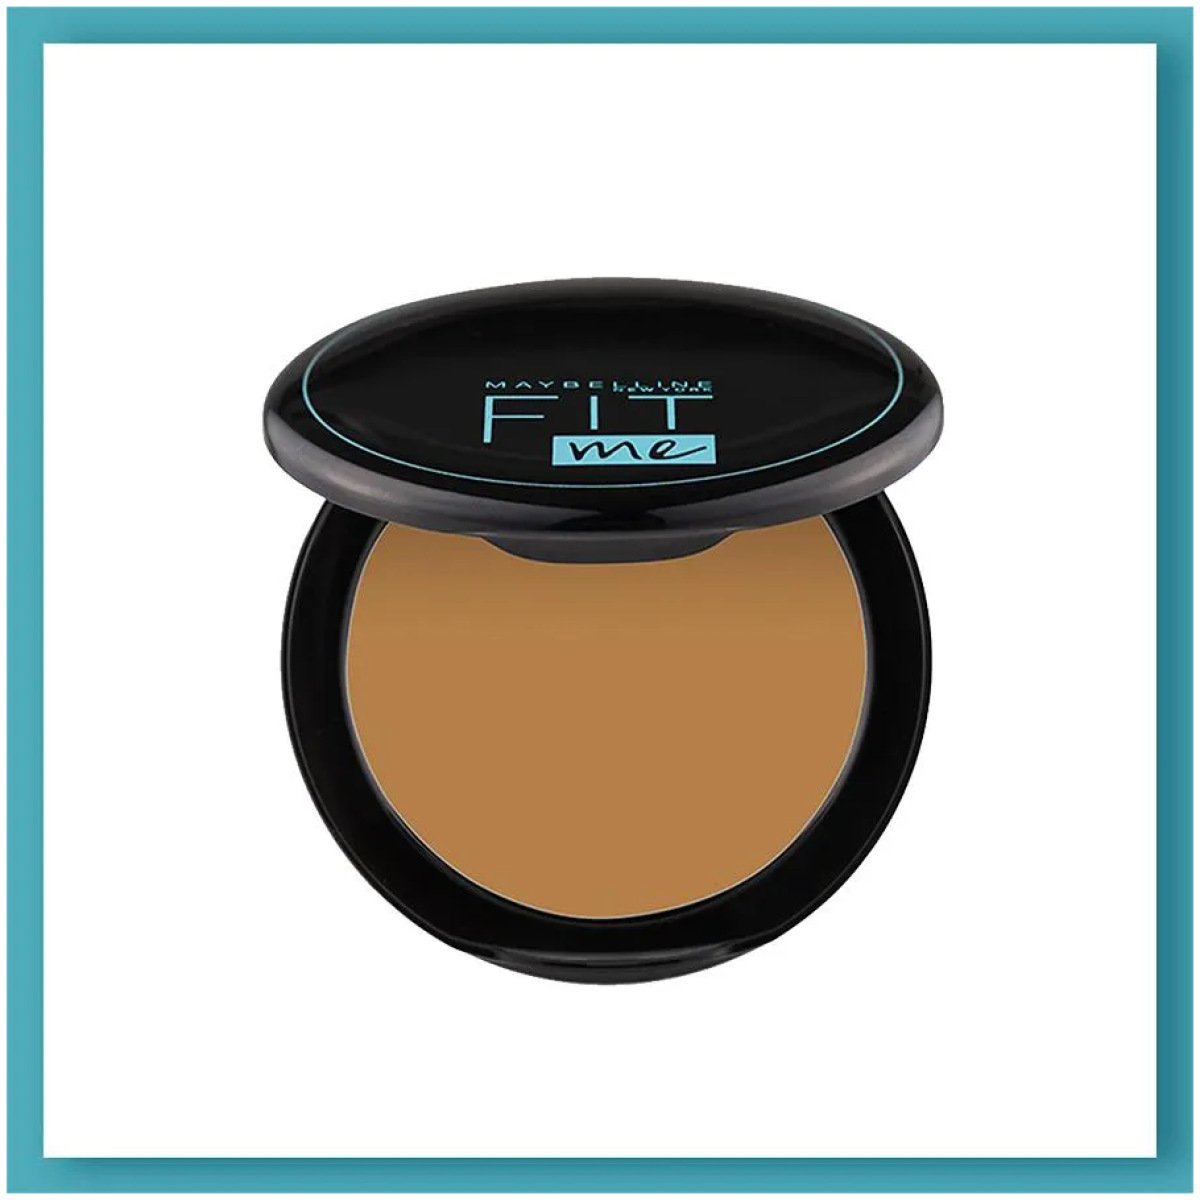 Maybelline New York Fit Me Matte+Poreless Compact Powder 330 Toffee